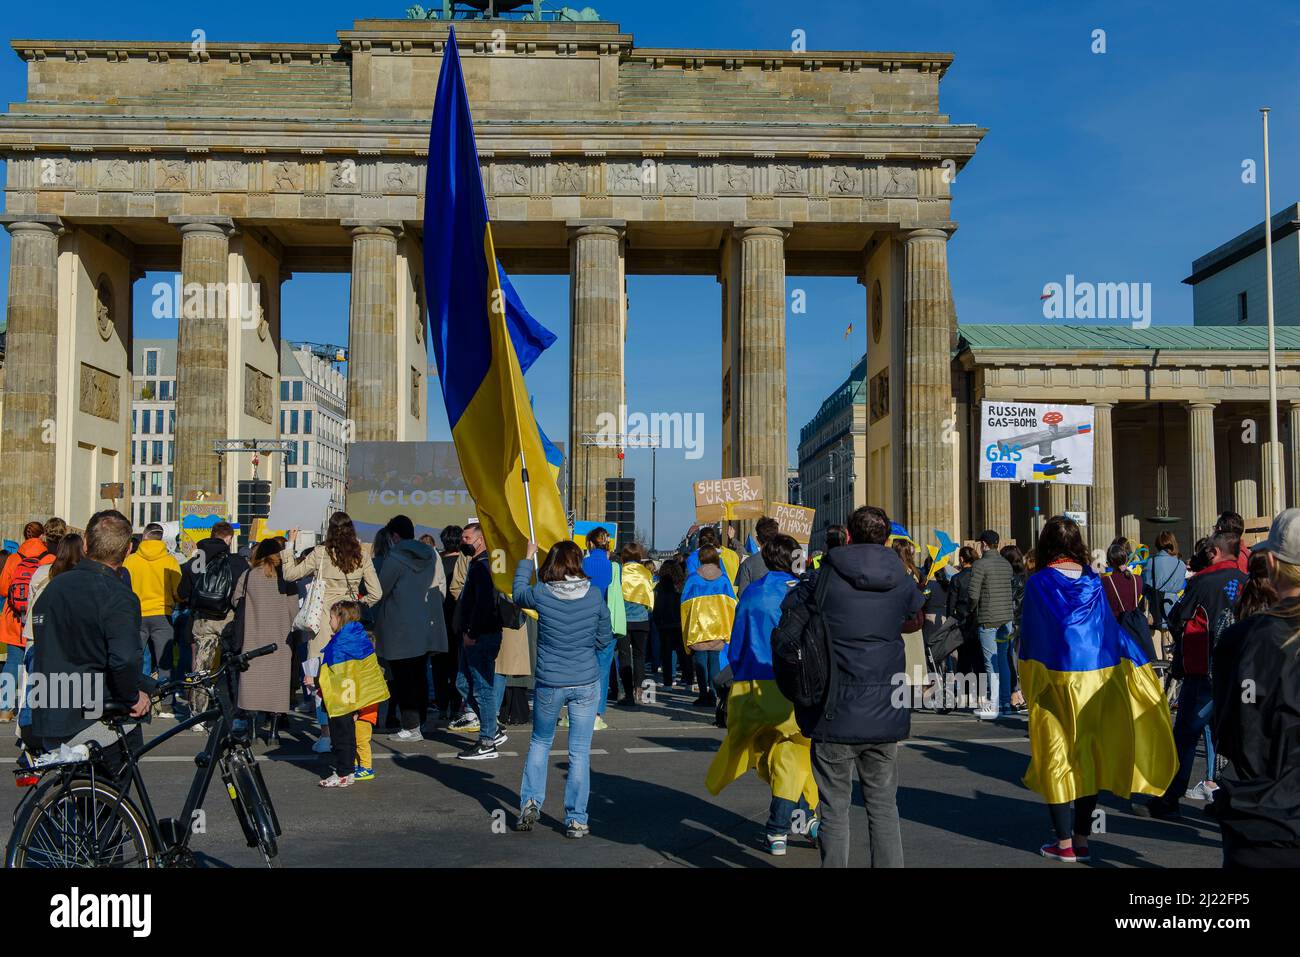 People in front of the Brandenburg Gate in Berlin Germany demonstrate against the war in Ukraine Stock Photo